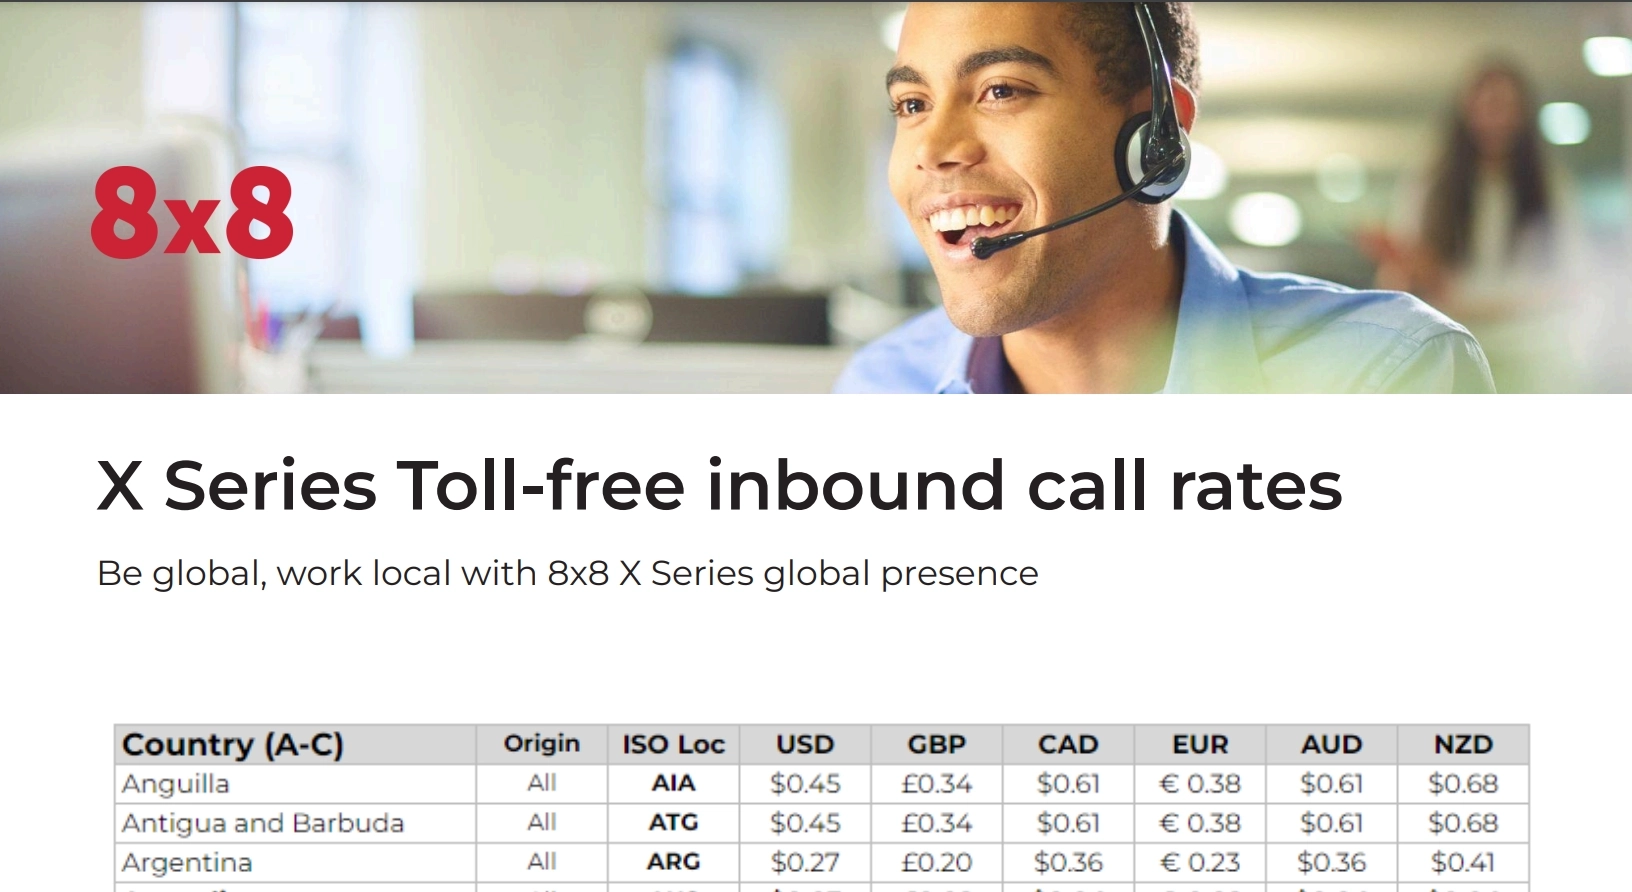 A screenshot showing 8x8's X Series toll-free inbound call rates